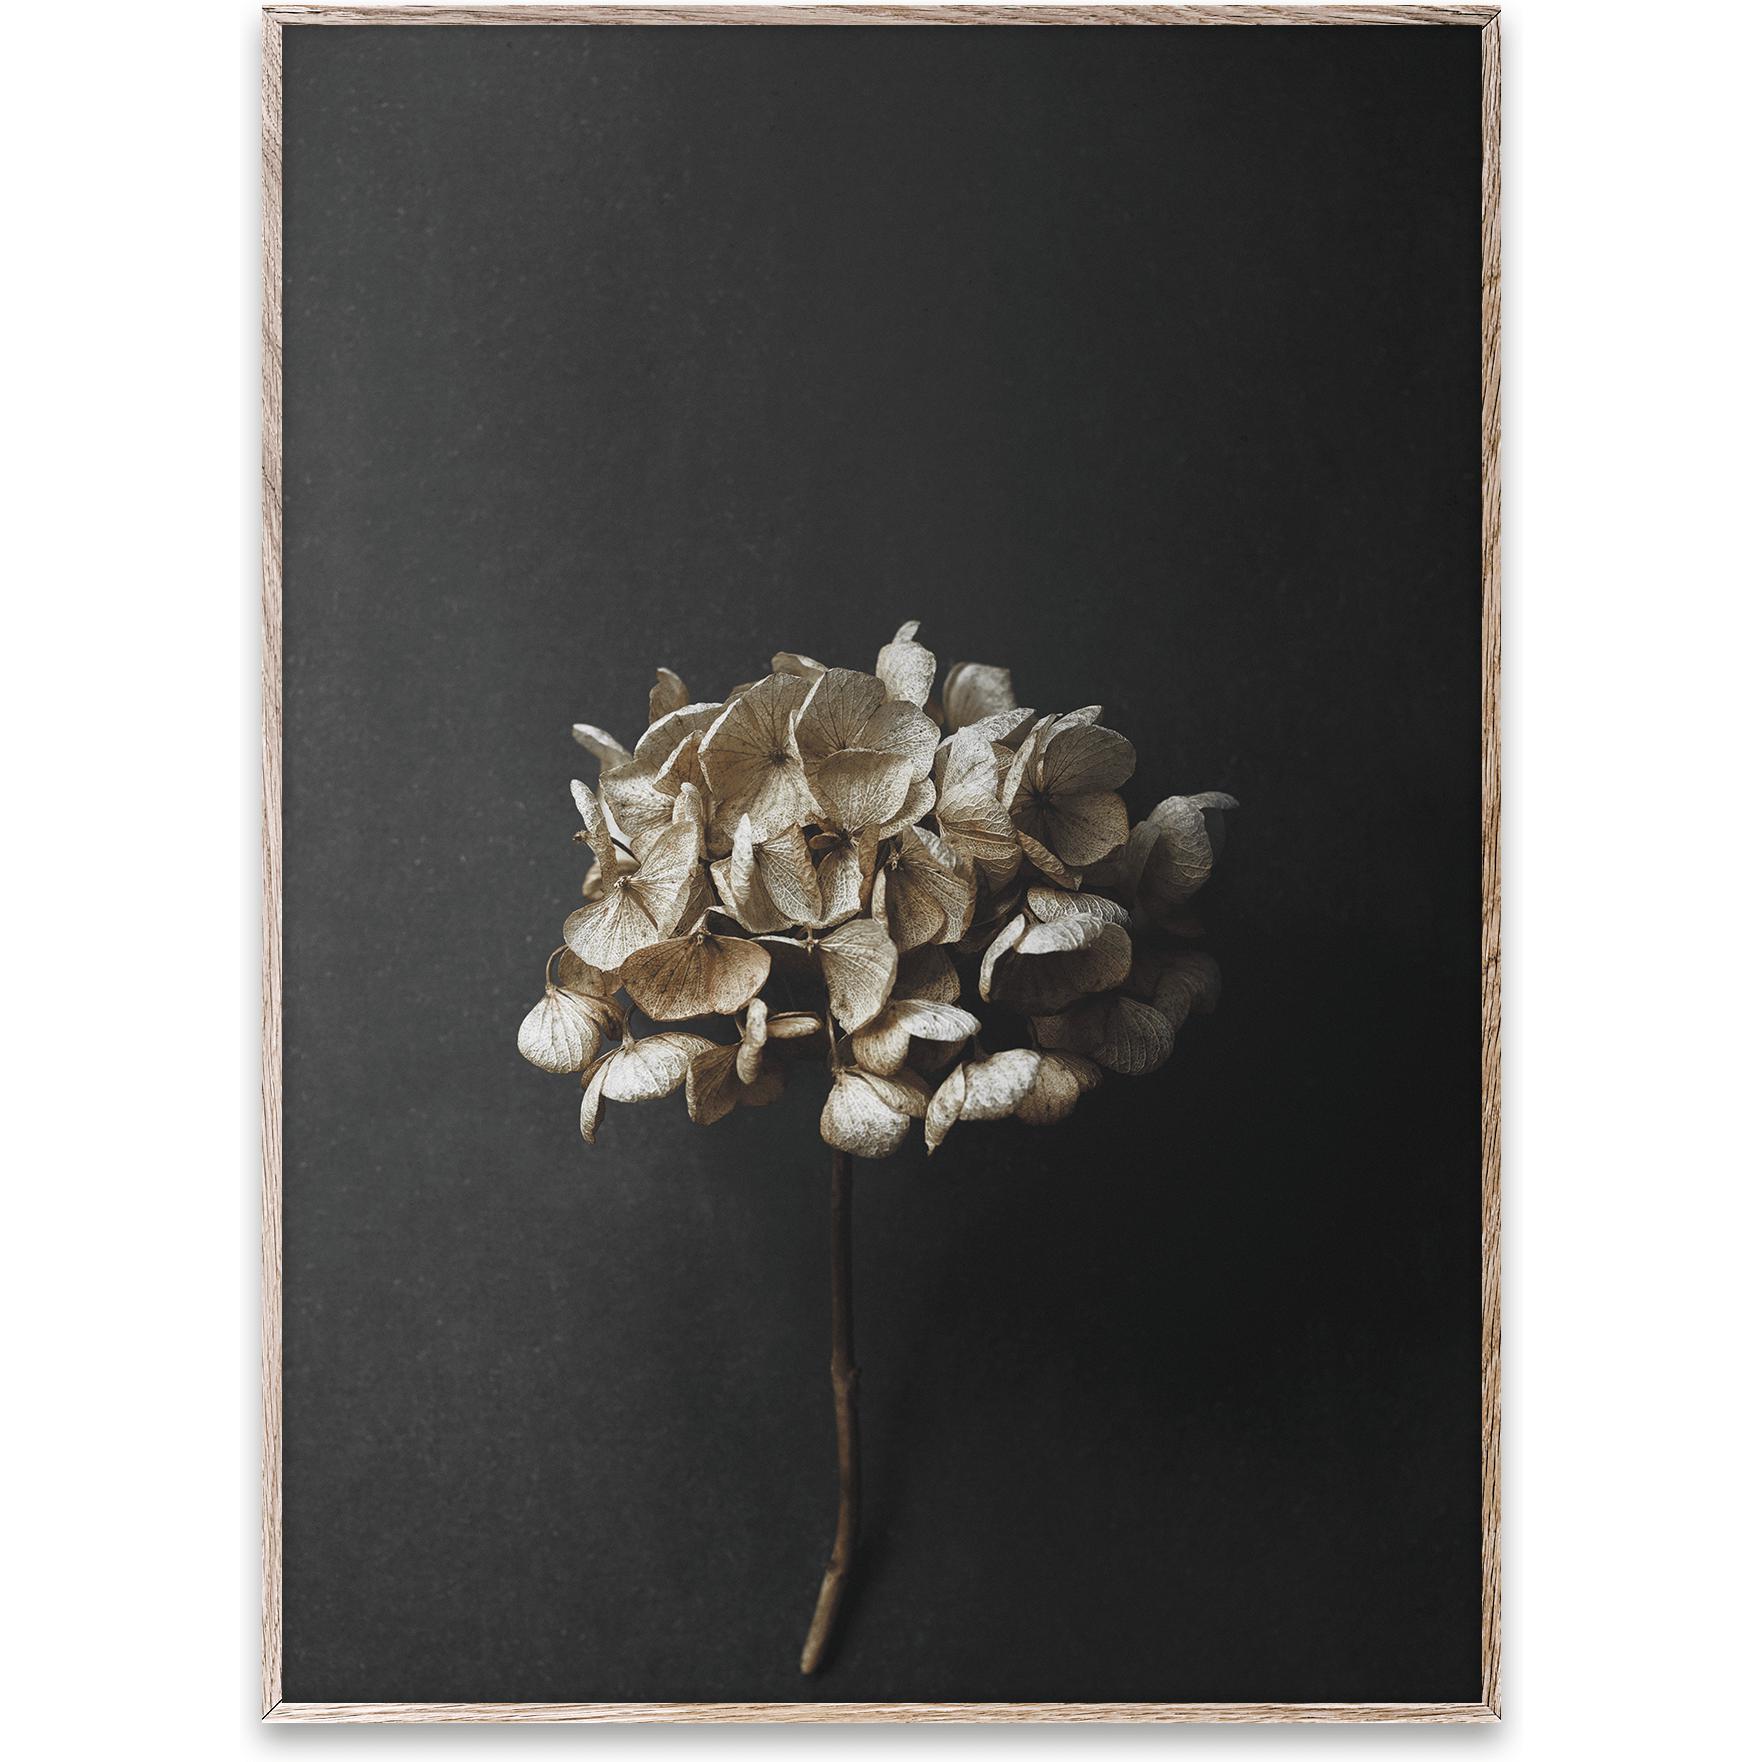 Paper Collective Still Life 04 Poster, 50x70 Cm